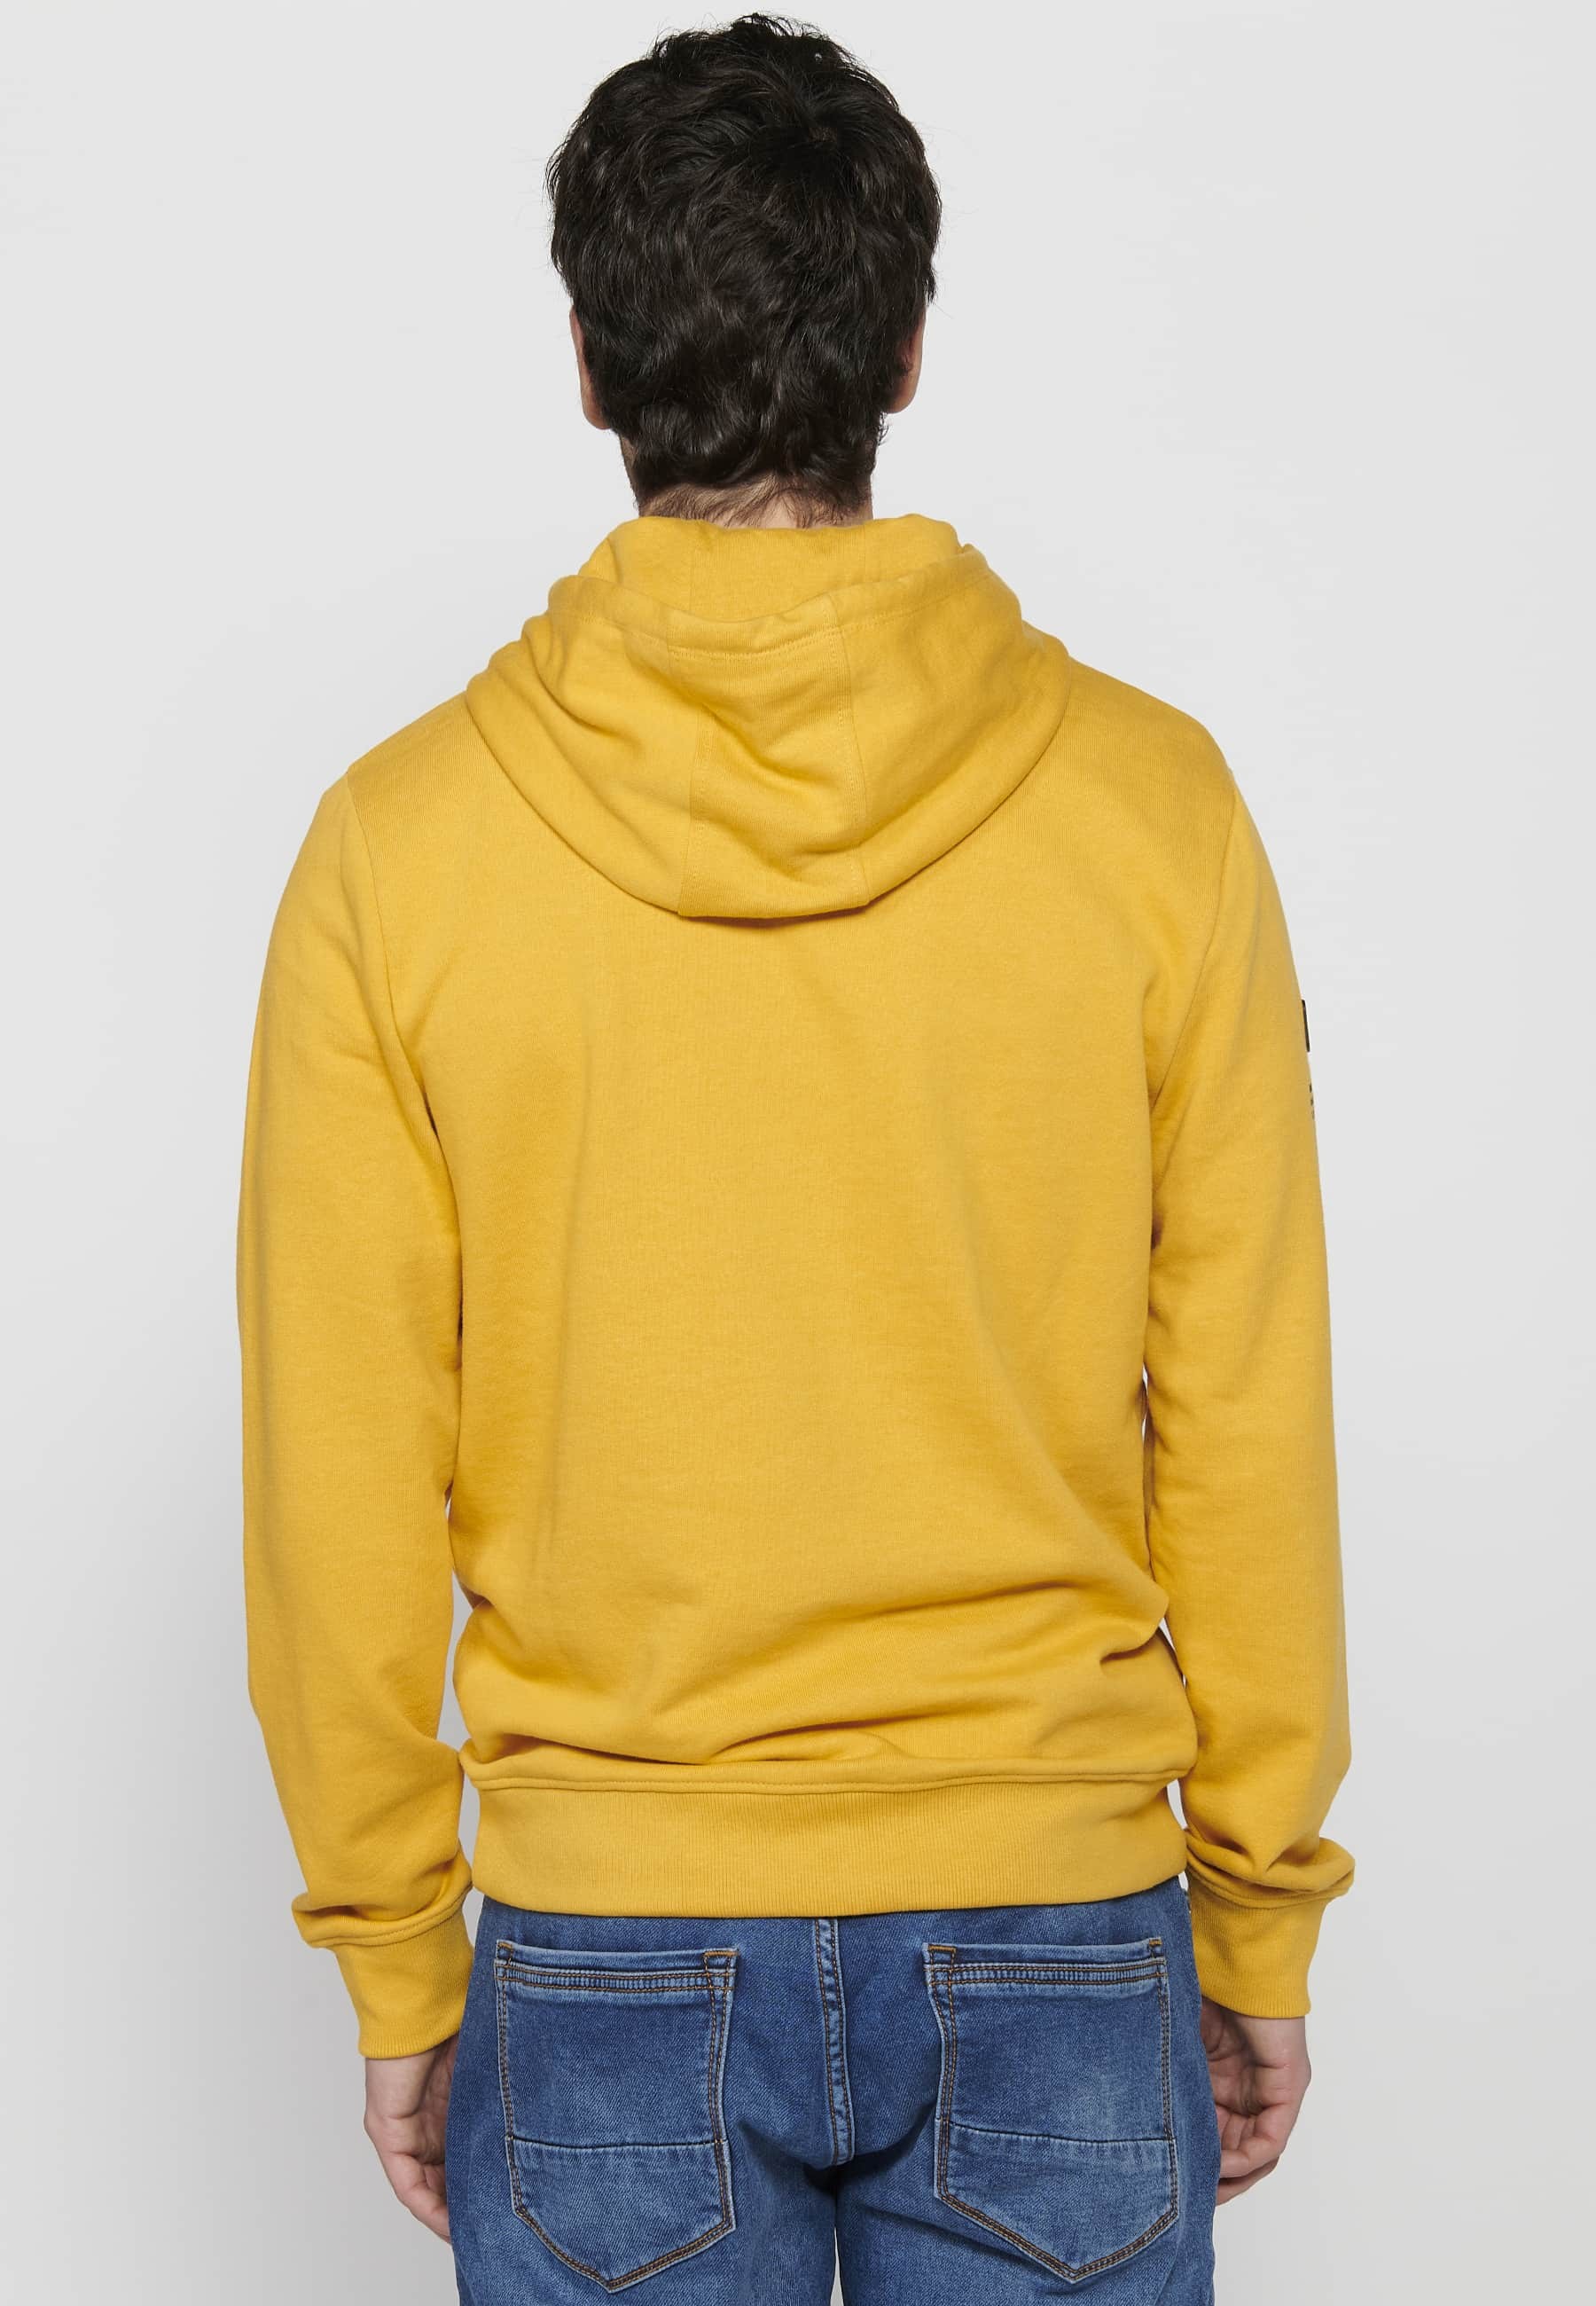 Long-sleeved sweatshirt with ribbed finishes and hooded collar with front detail of embossed letters in Yellow for Men 5